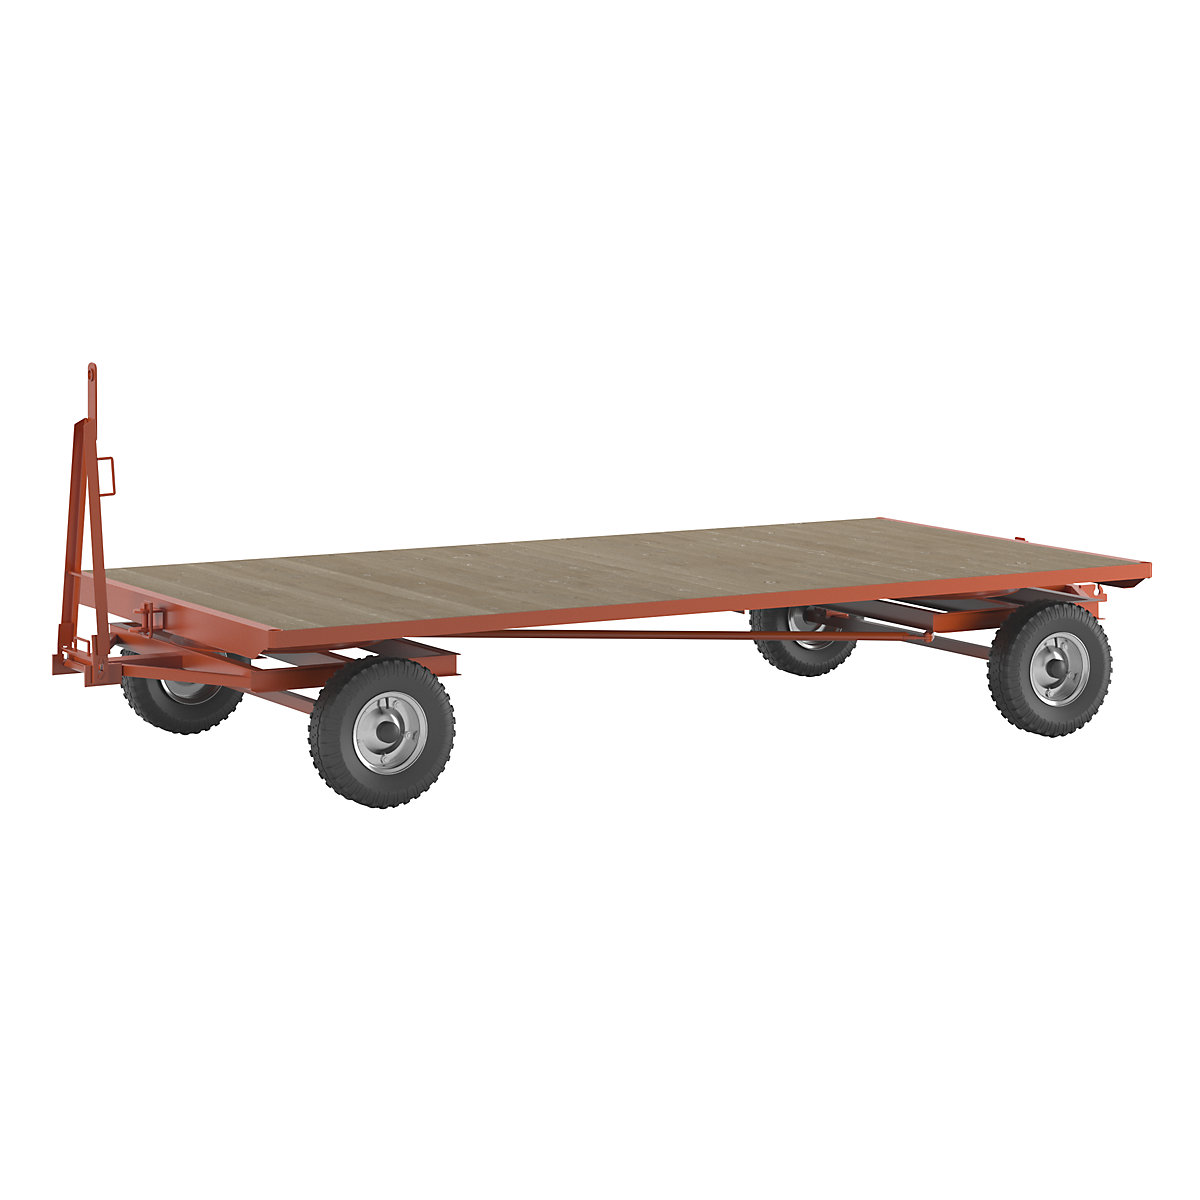 Trailer, 4-wheel double turntable steering, max. load 5 t, platform 4.0 x 2.0 m, pneumatic tyres-3